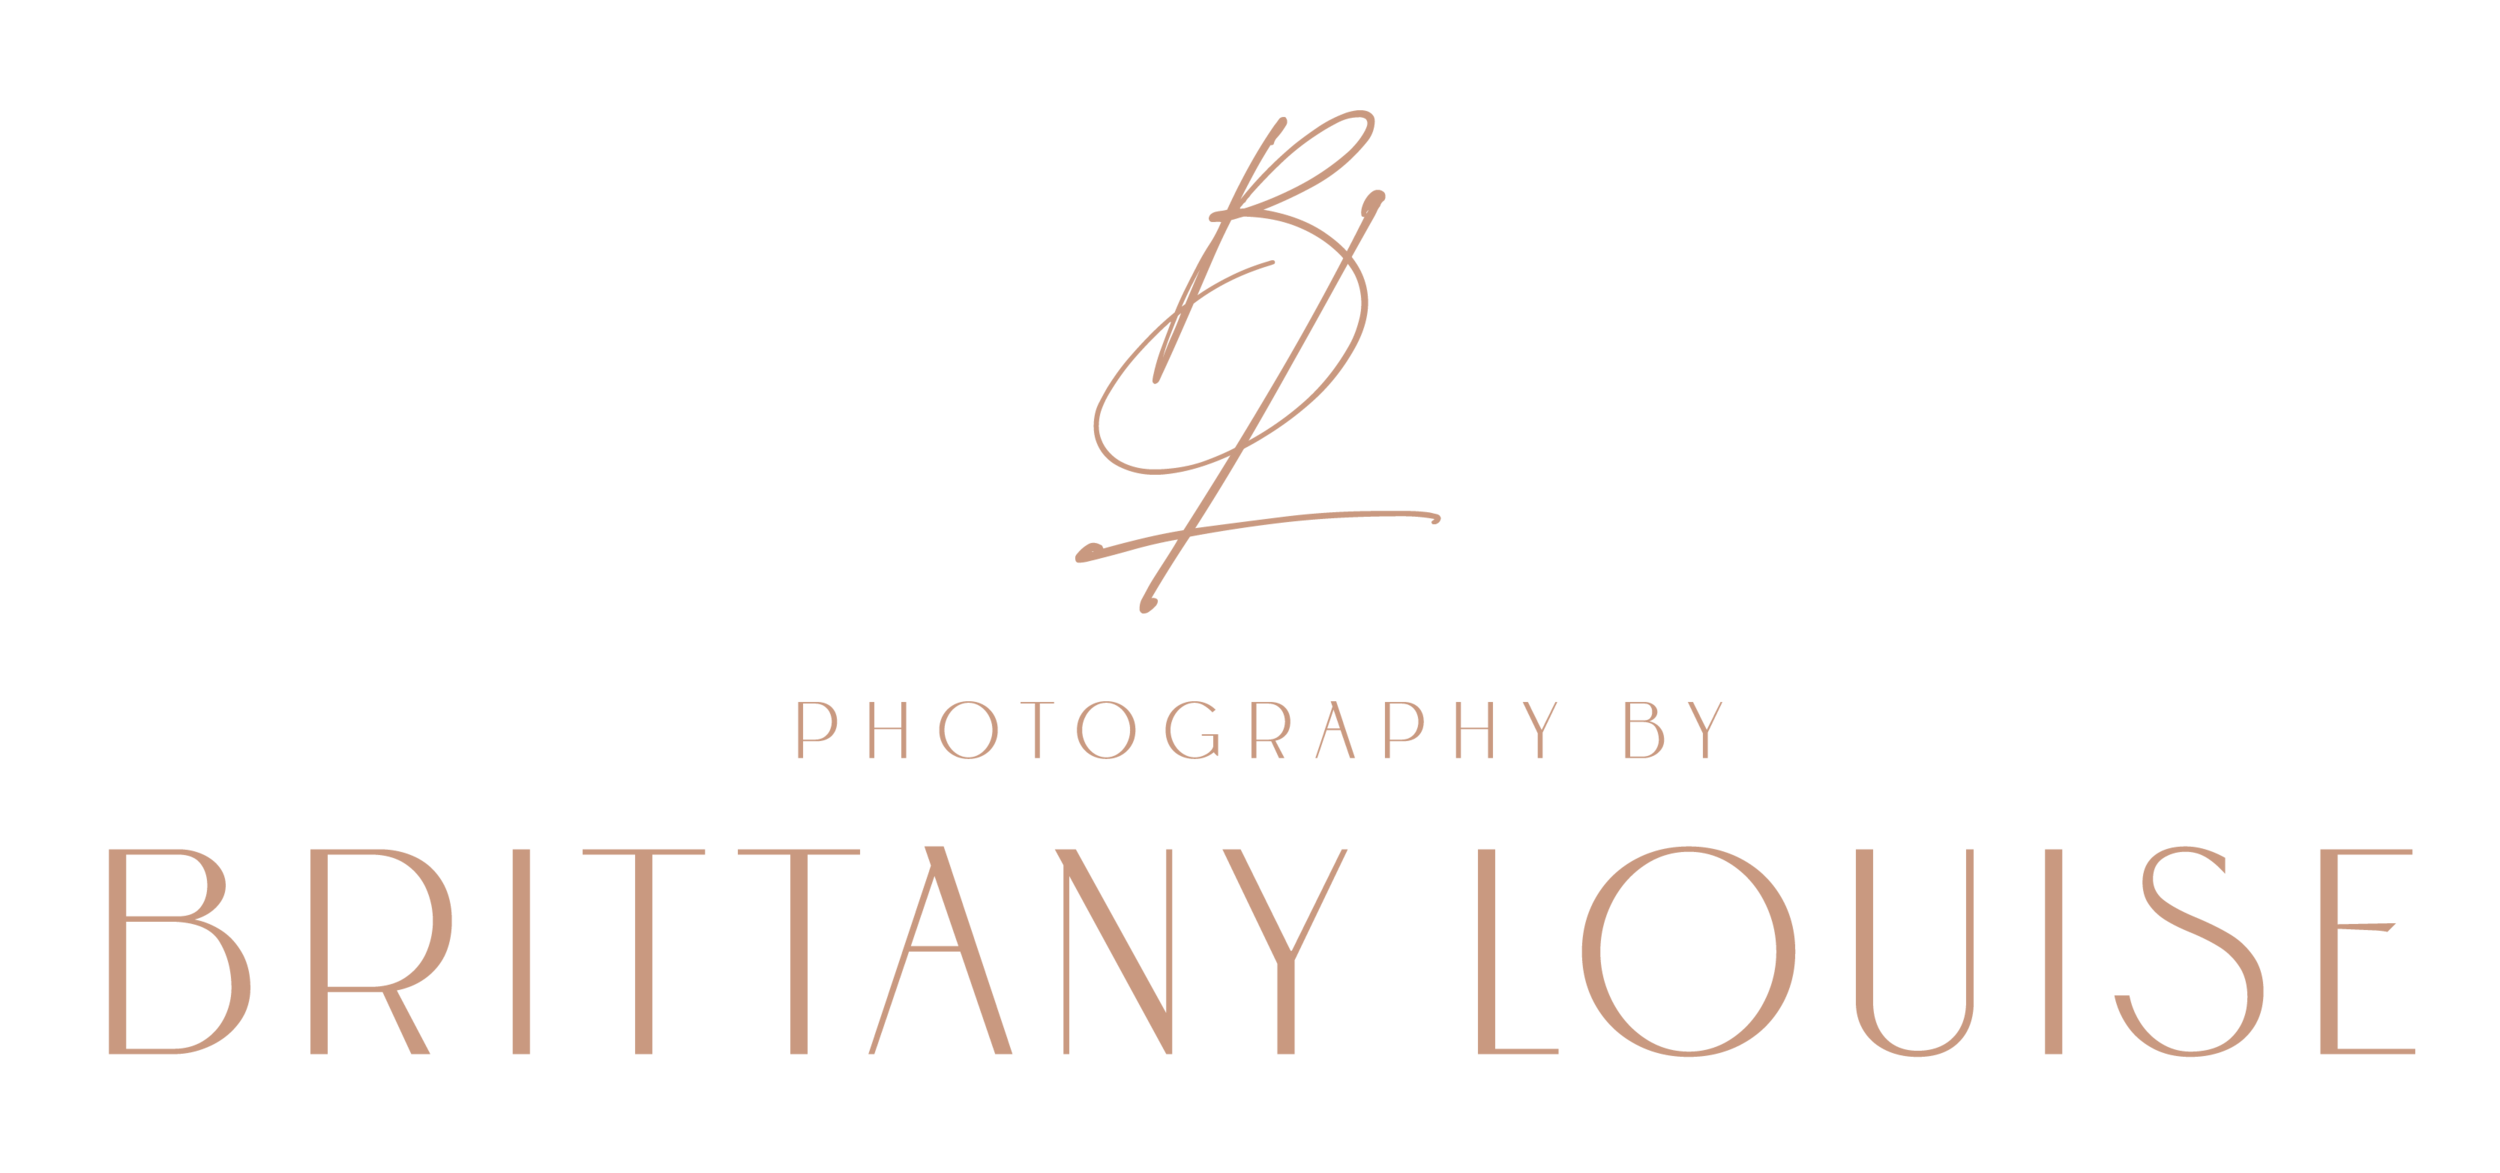 Photography by Brittany Louise LLC